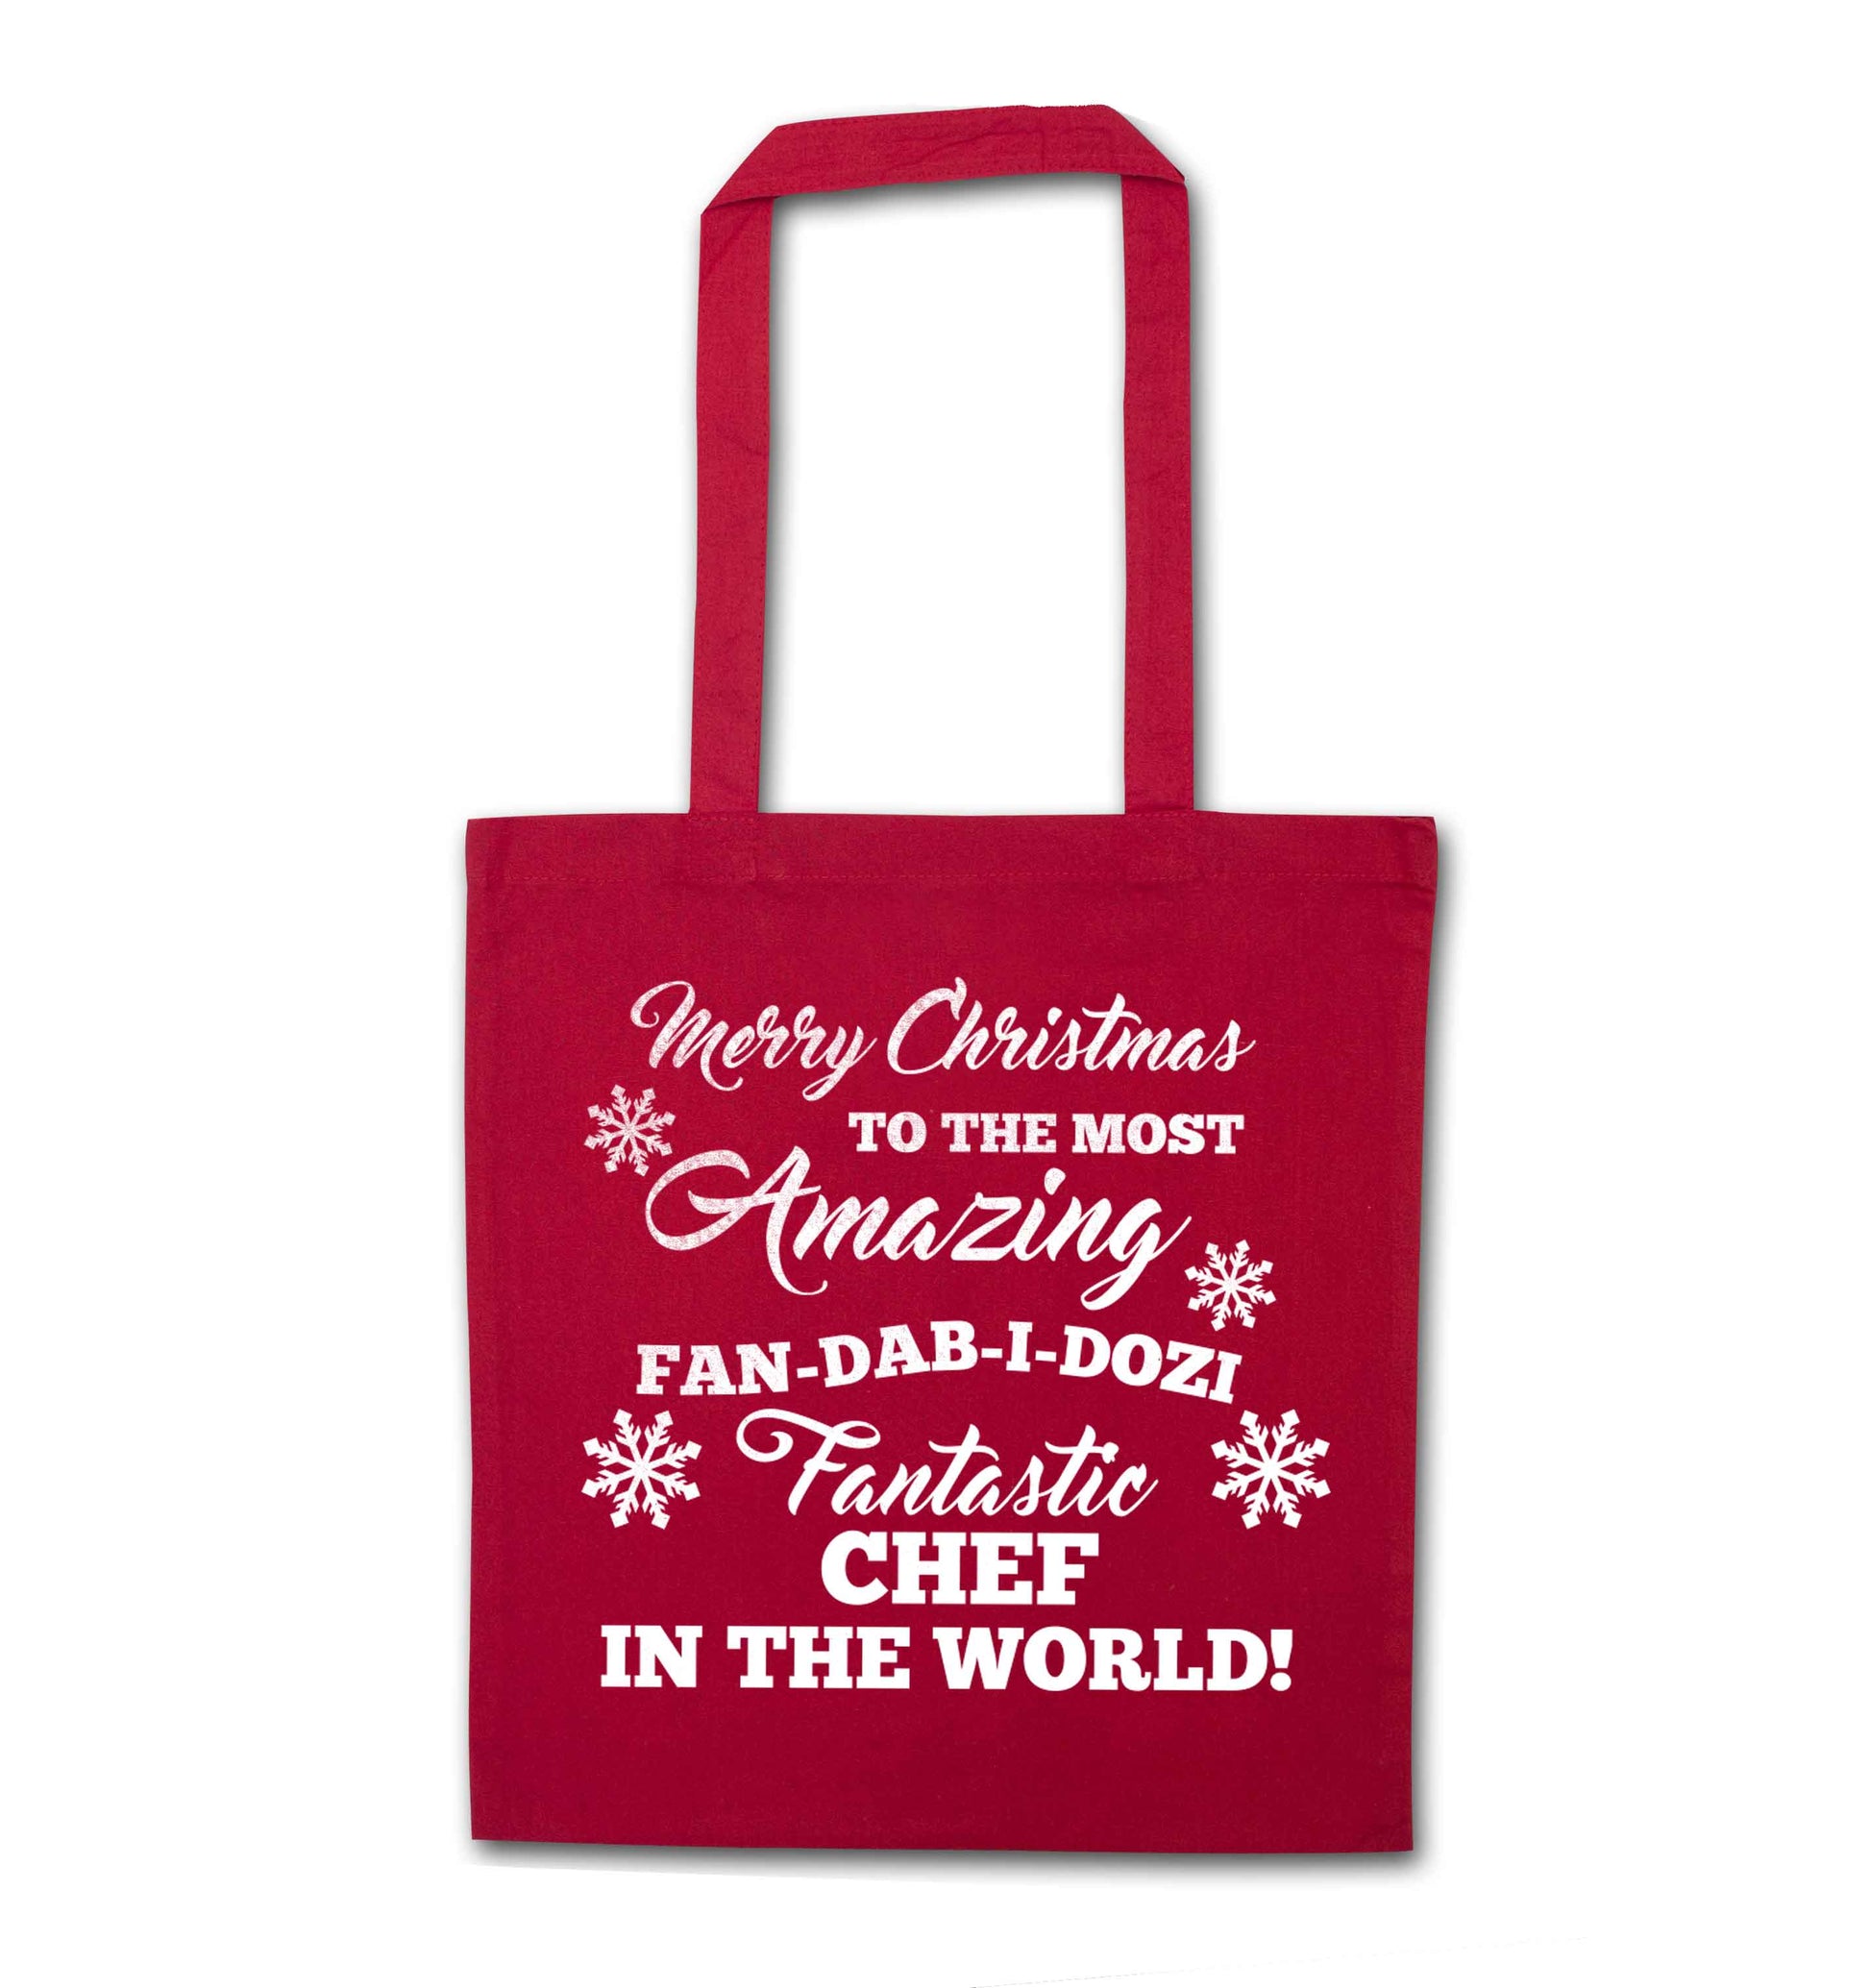 Merry Christmas to the most amazing fan-dab-i-dozi fantasic chef in the world red tote bag